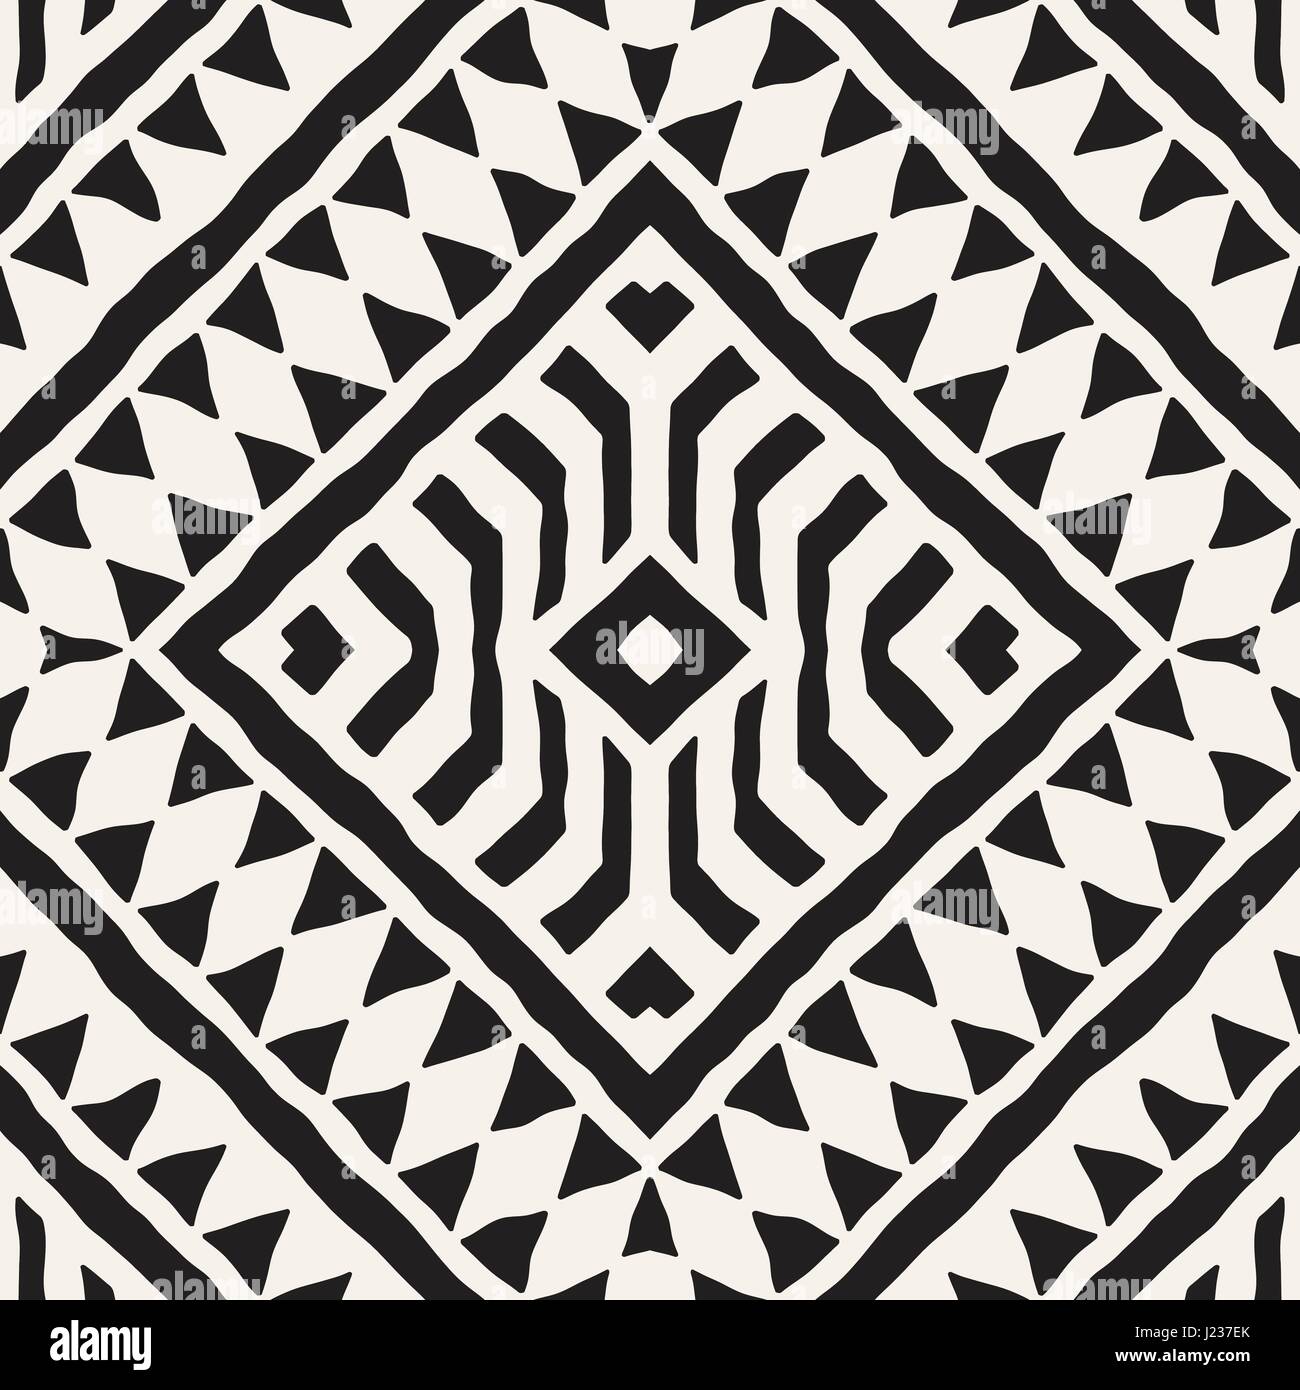 Black and white tribal vector seamless pattern with doodle elements. Aztec abstract geometric art print. Ethnic ornamental hand drawn backdrop. Stock Vector